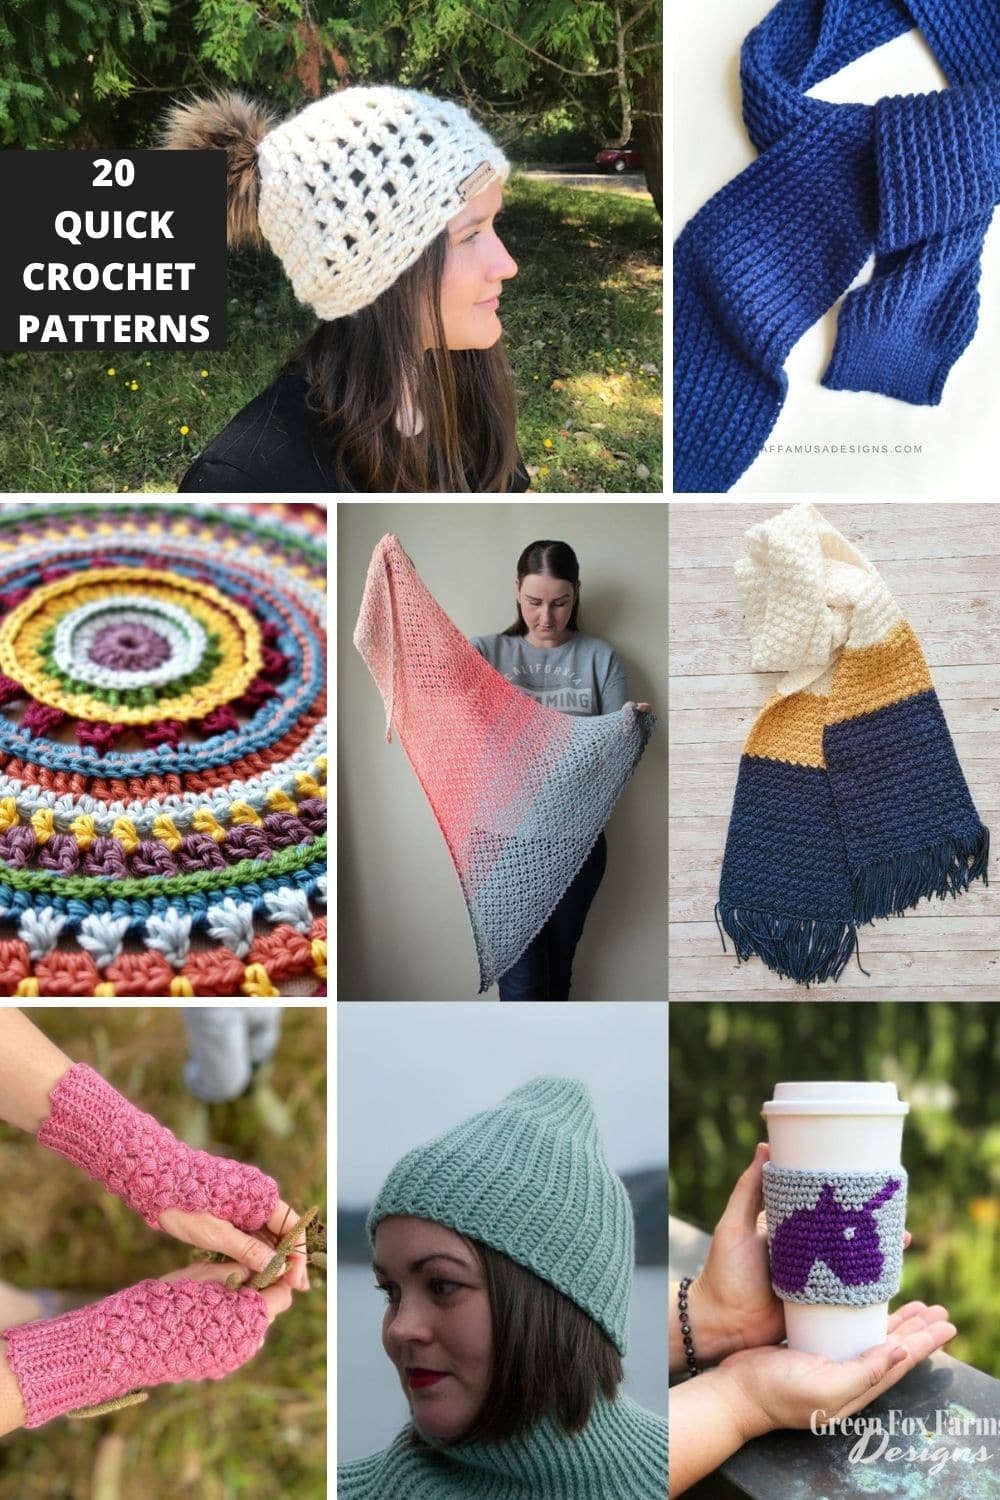 27 Crochet Hats and Scarves Patterns Free! - The Loophole Fox